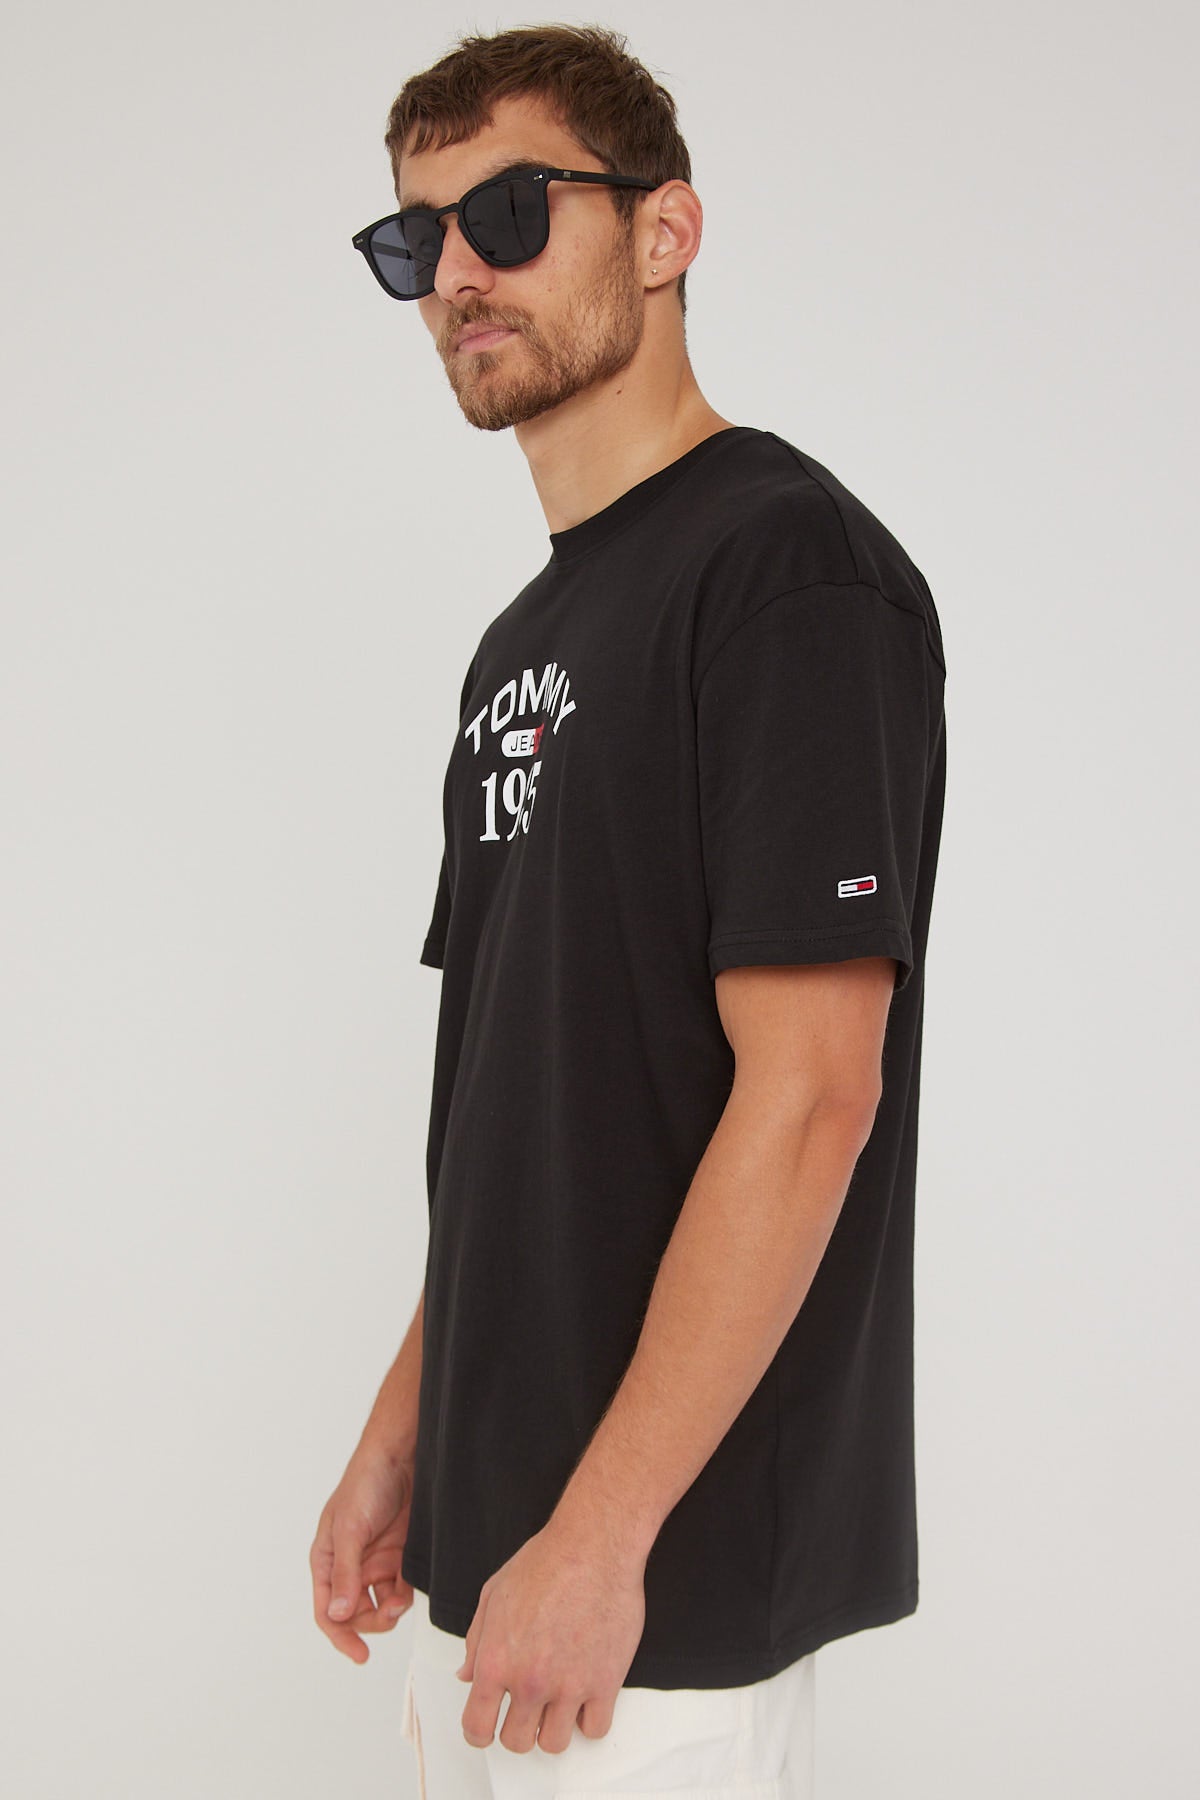 Tommy Jeans TJM RBW Skater Universal White College Tee – Store